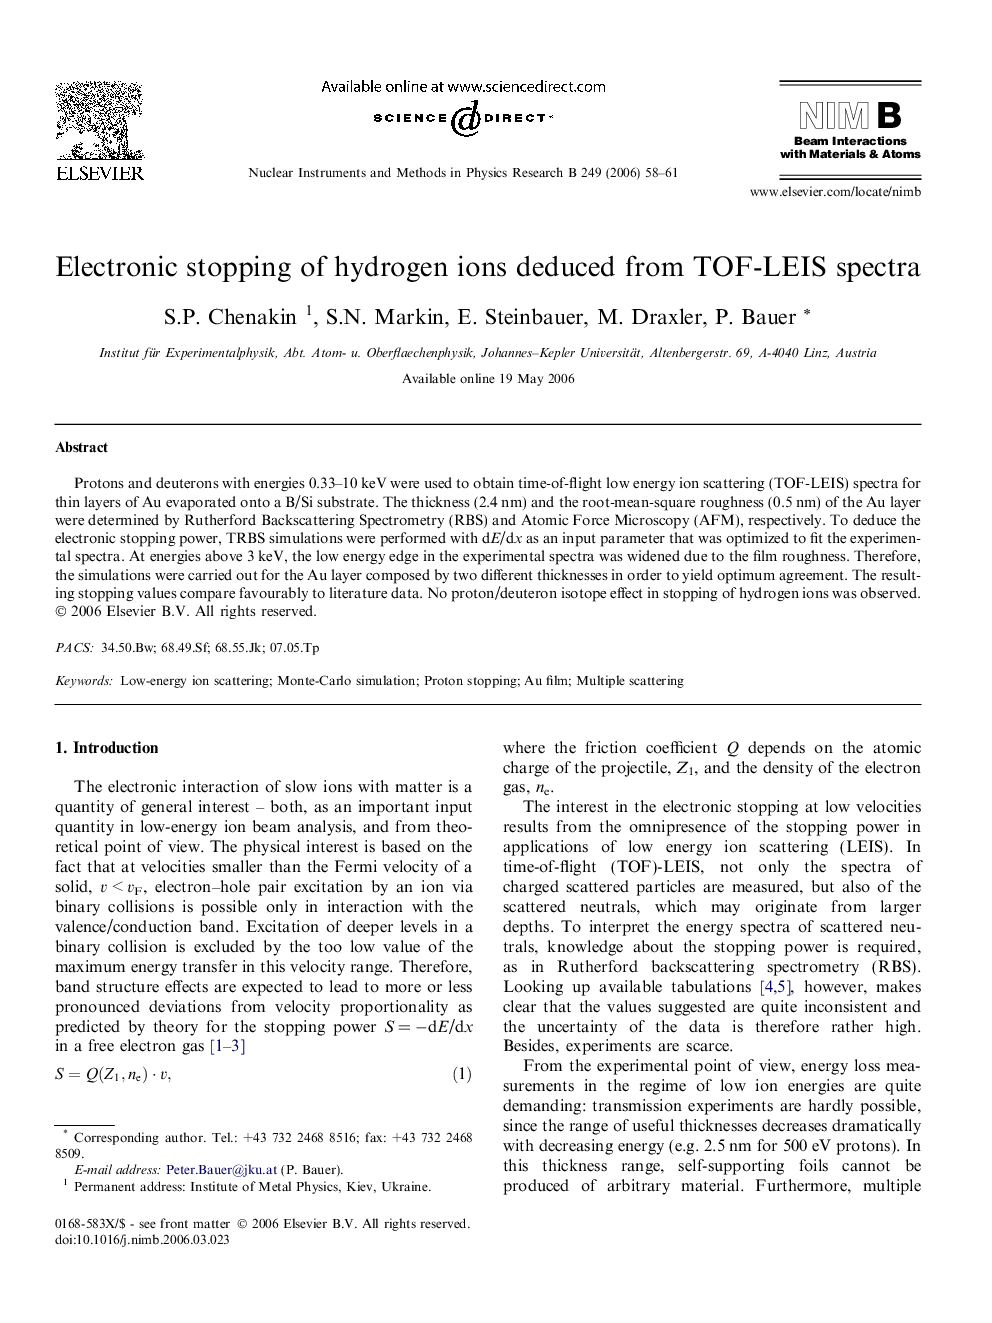 Electronic stopping of hydrogen ions deduced from TOF-LEIS spectra